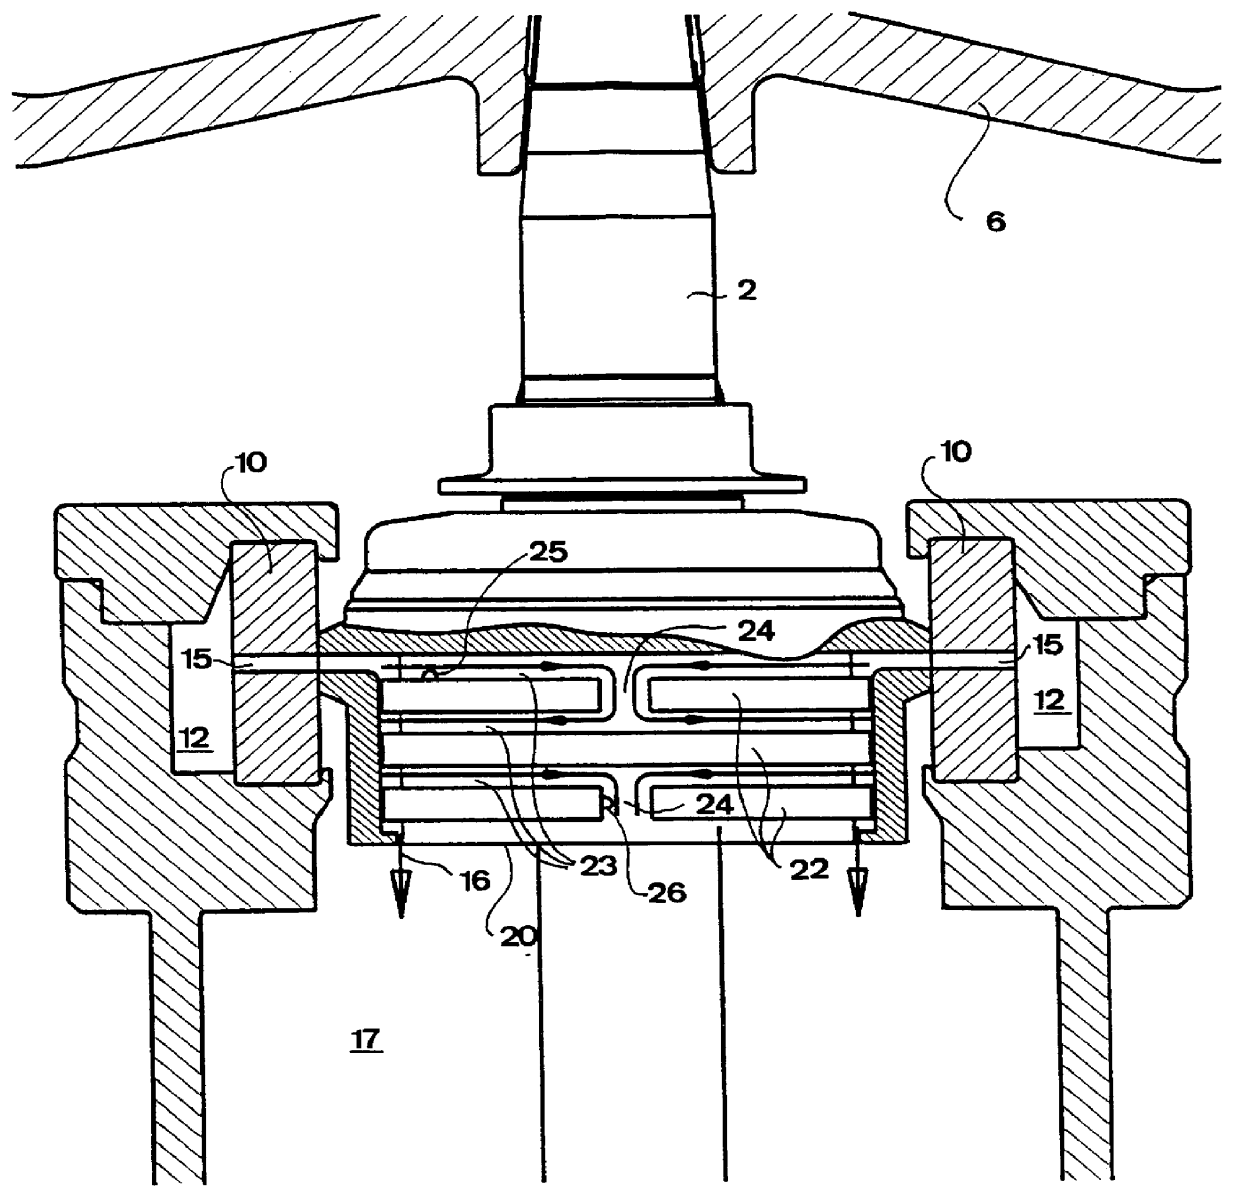 Apparatus and method to cool a bearing in a centrifugal separator